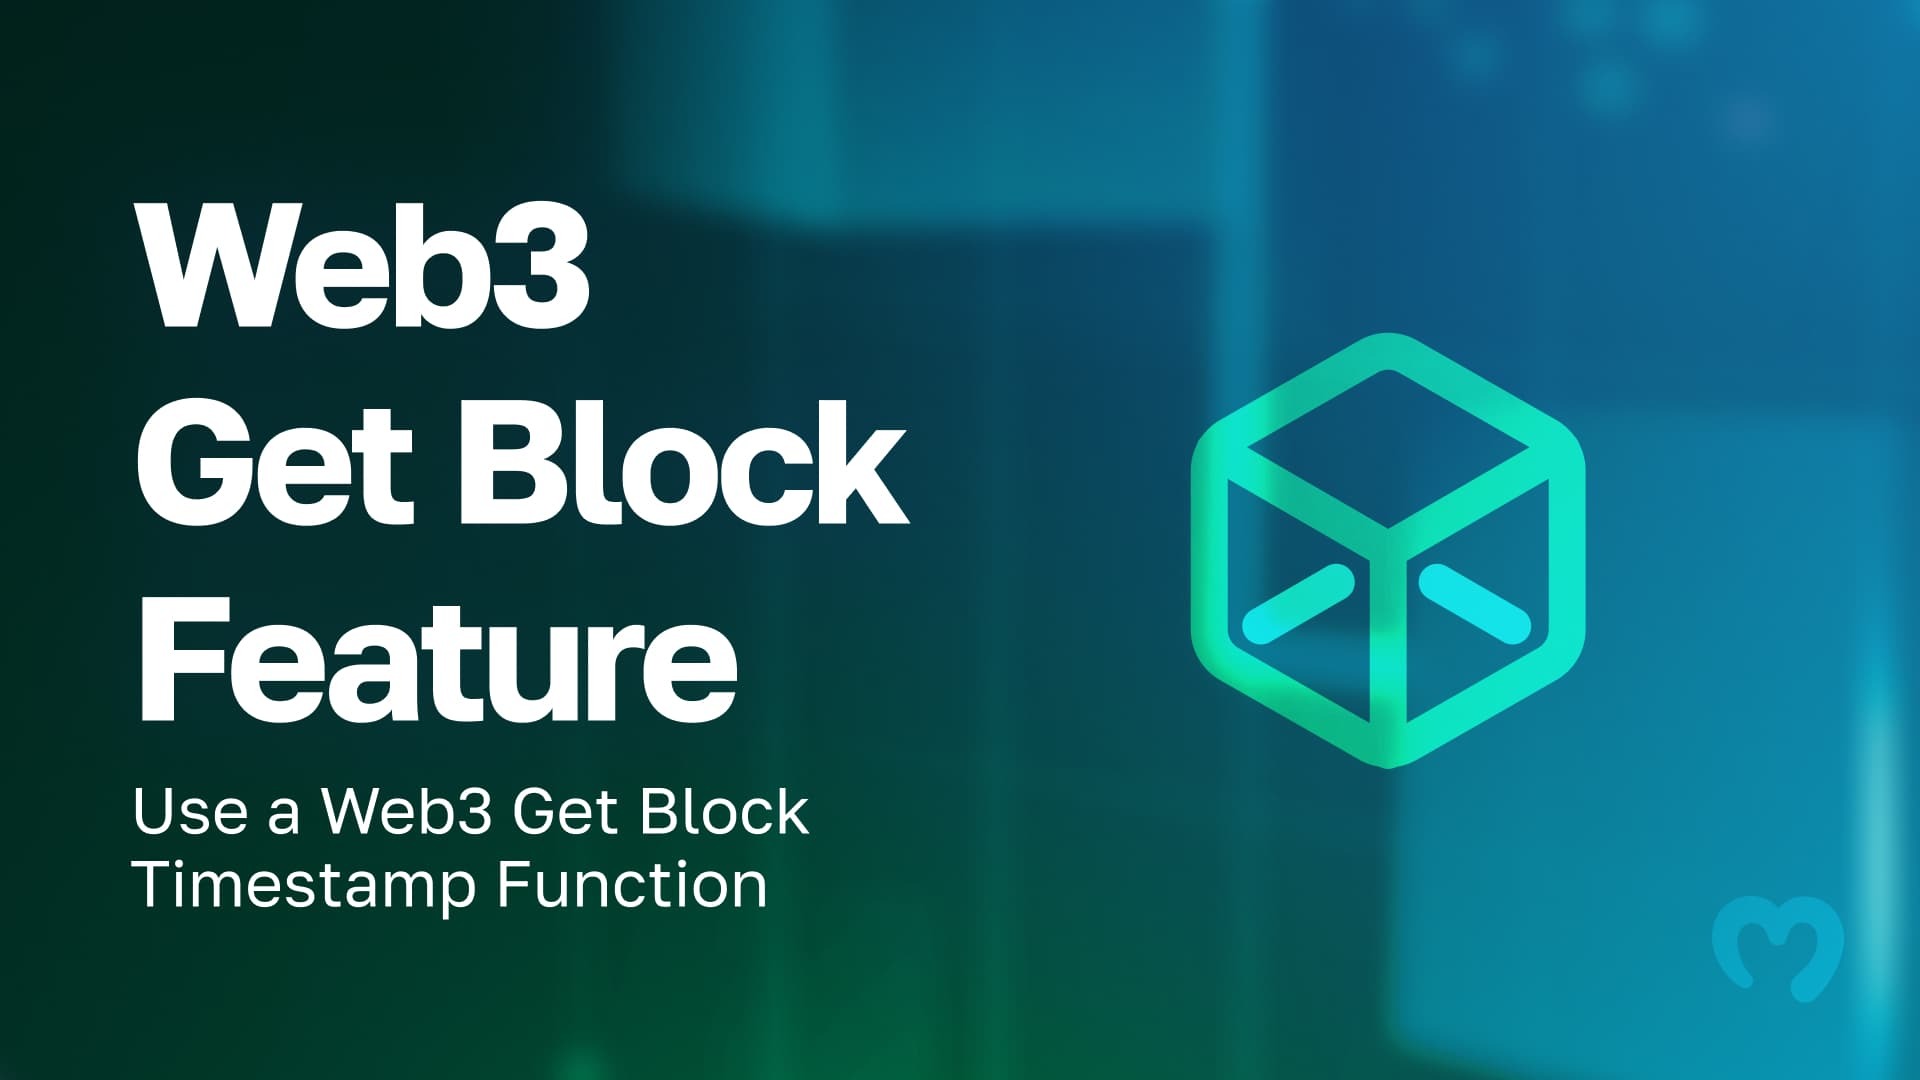 Web3 Get Block Feature - Use a Web3 Get Block Timestamp Function